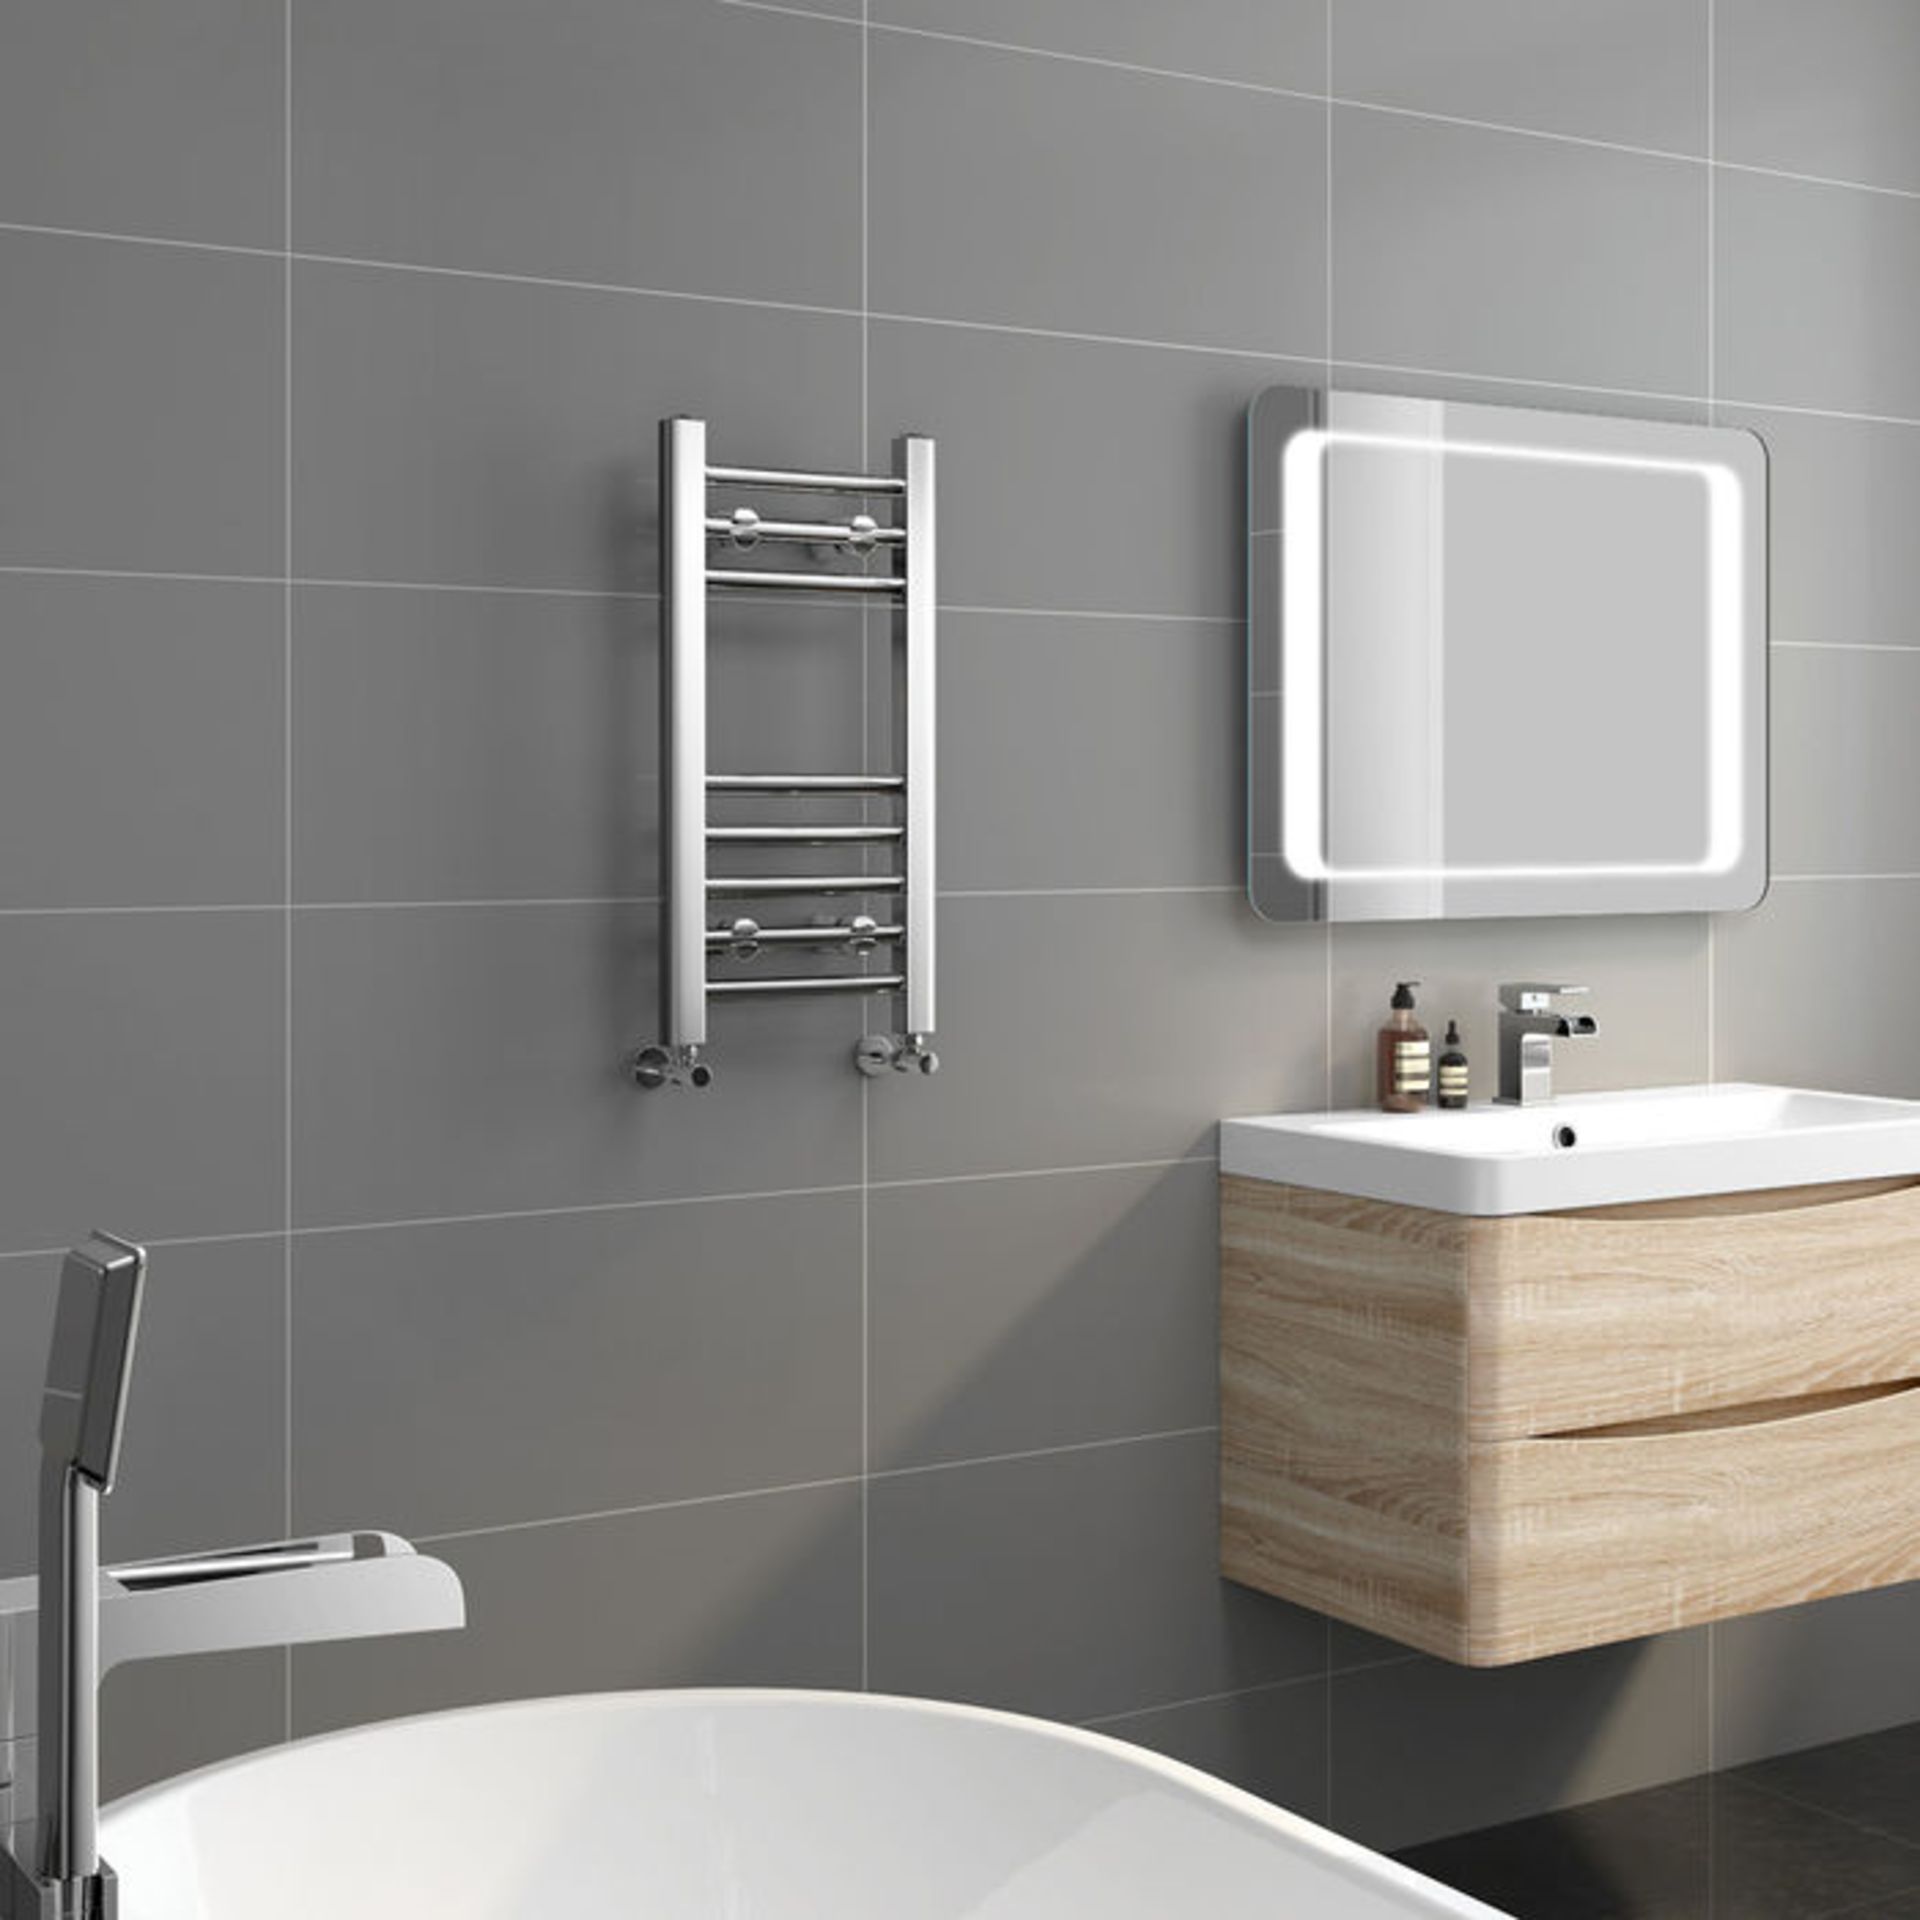 (ED160) 600x300mm - 20mm Tubes - Chrome Heated Straight Rail Ladder Towel Rail. Low carbon steel - Image 2 of 3